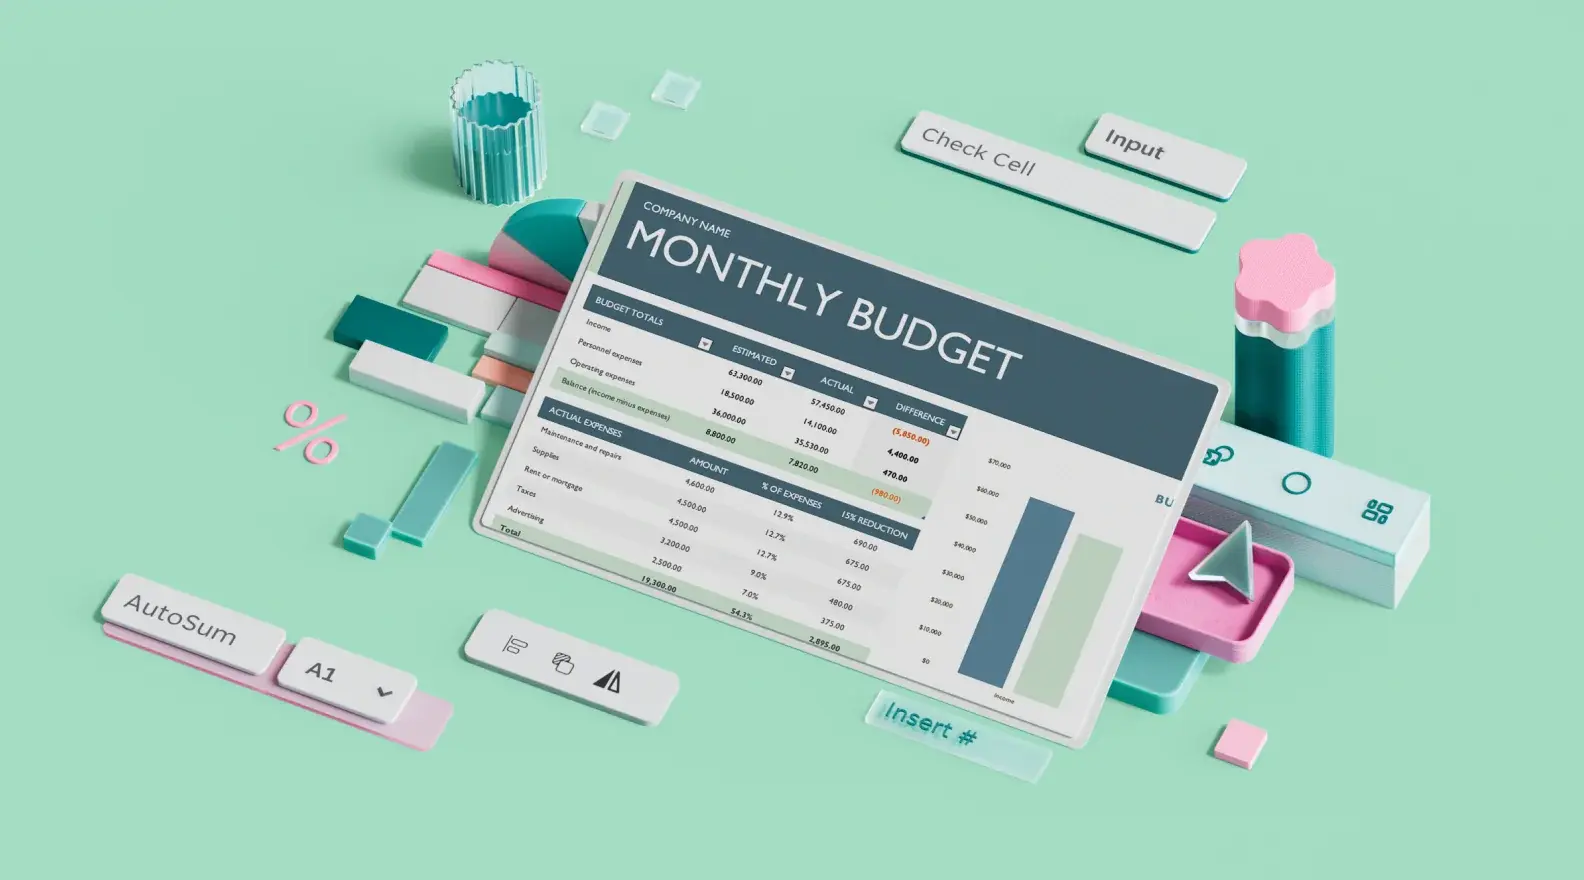 Monthly business budget Microsoft Excel template surrounded by 3D design elements